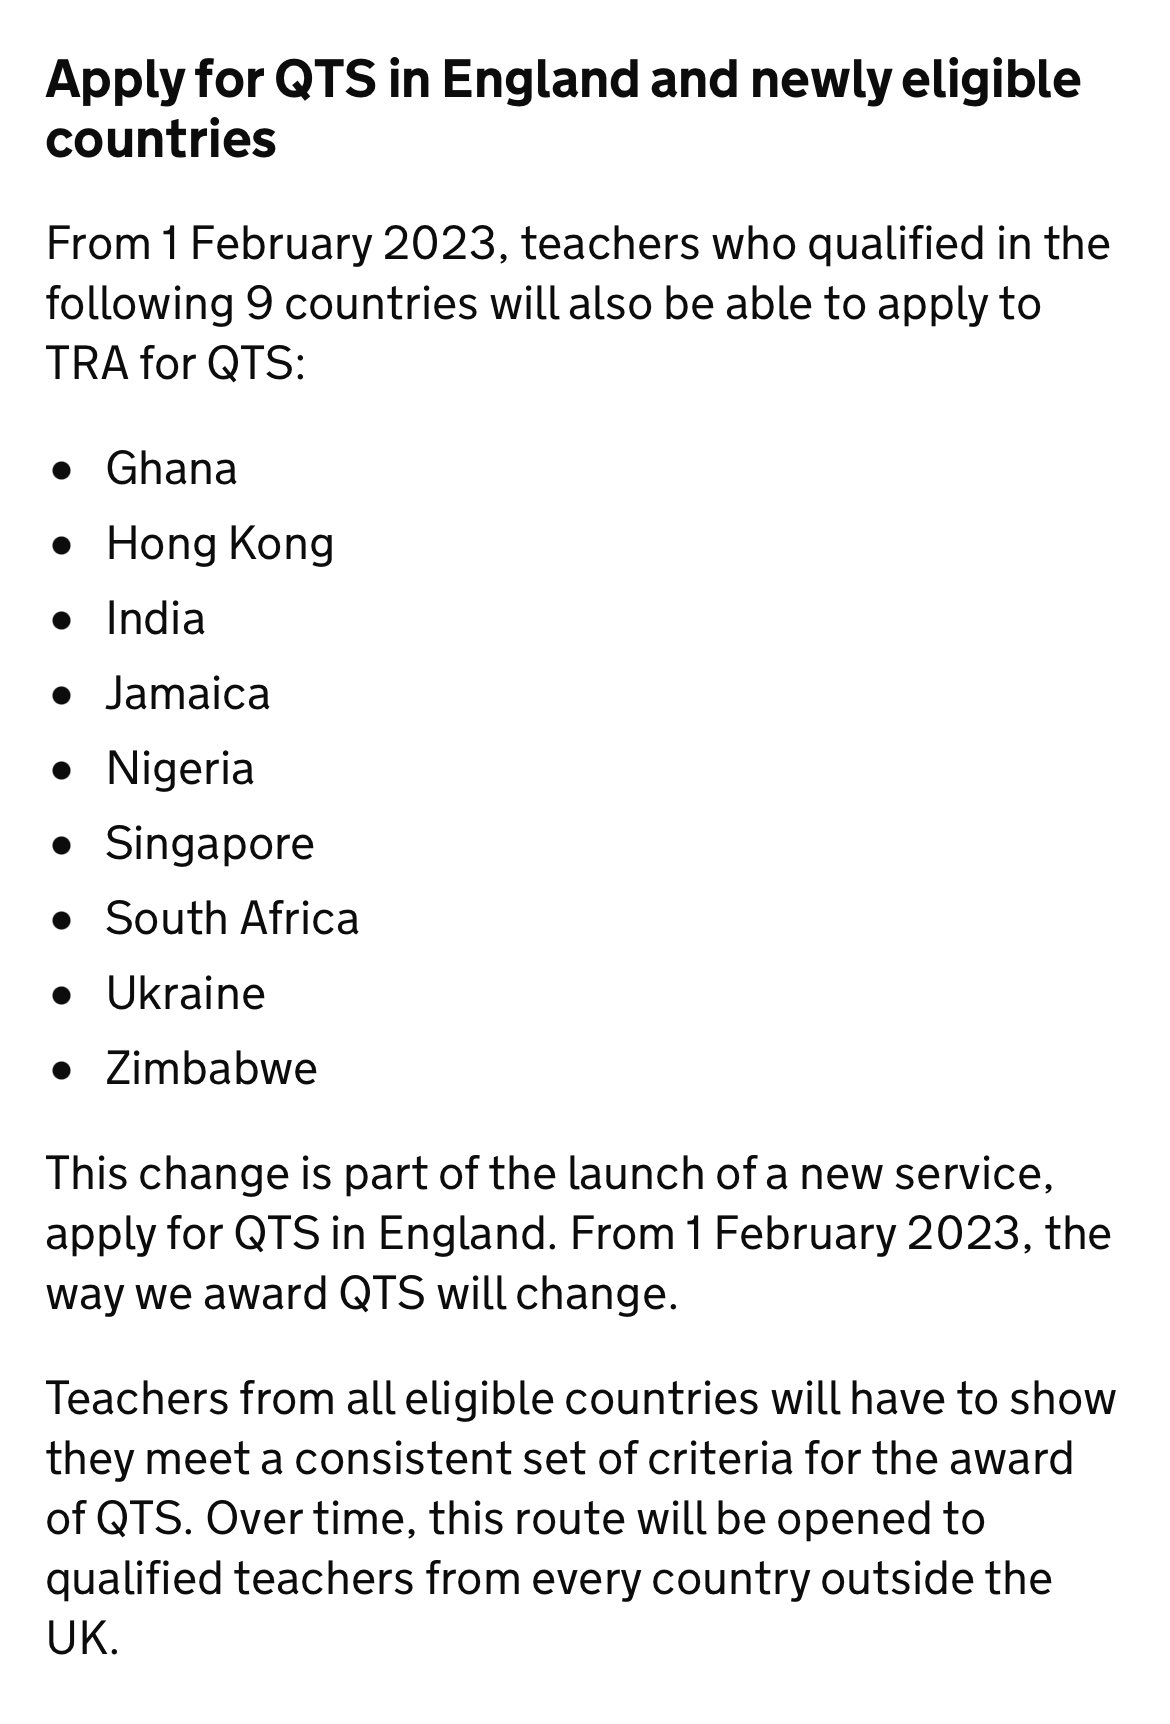 The is seeking to attract teachers that qualified in Zimbabwe, to get them to work in England. An article published on UK government website https://www.gov.uk/government/publications/apply-for-qualified-teacher-status-qts-if-you-teach-outside-the-uk/routes-to-qualified-teacher-status-qts-for-teachers-and-those-with-teaching-experience-outside-the-uk says that teachers will not be able to apply to teach in the UK starting 1 February 2023.
Zimbabweans will be able to apply for a UK professional teaching qualification called qualified teacher status (QTS). This will be possible through the UK's Teaching Regulation Agency (TRA). The pbulication by the UK government announcing this change was published on 1 December 2022.